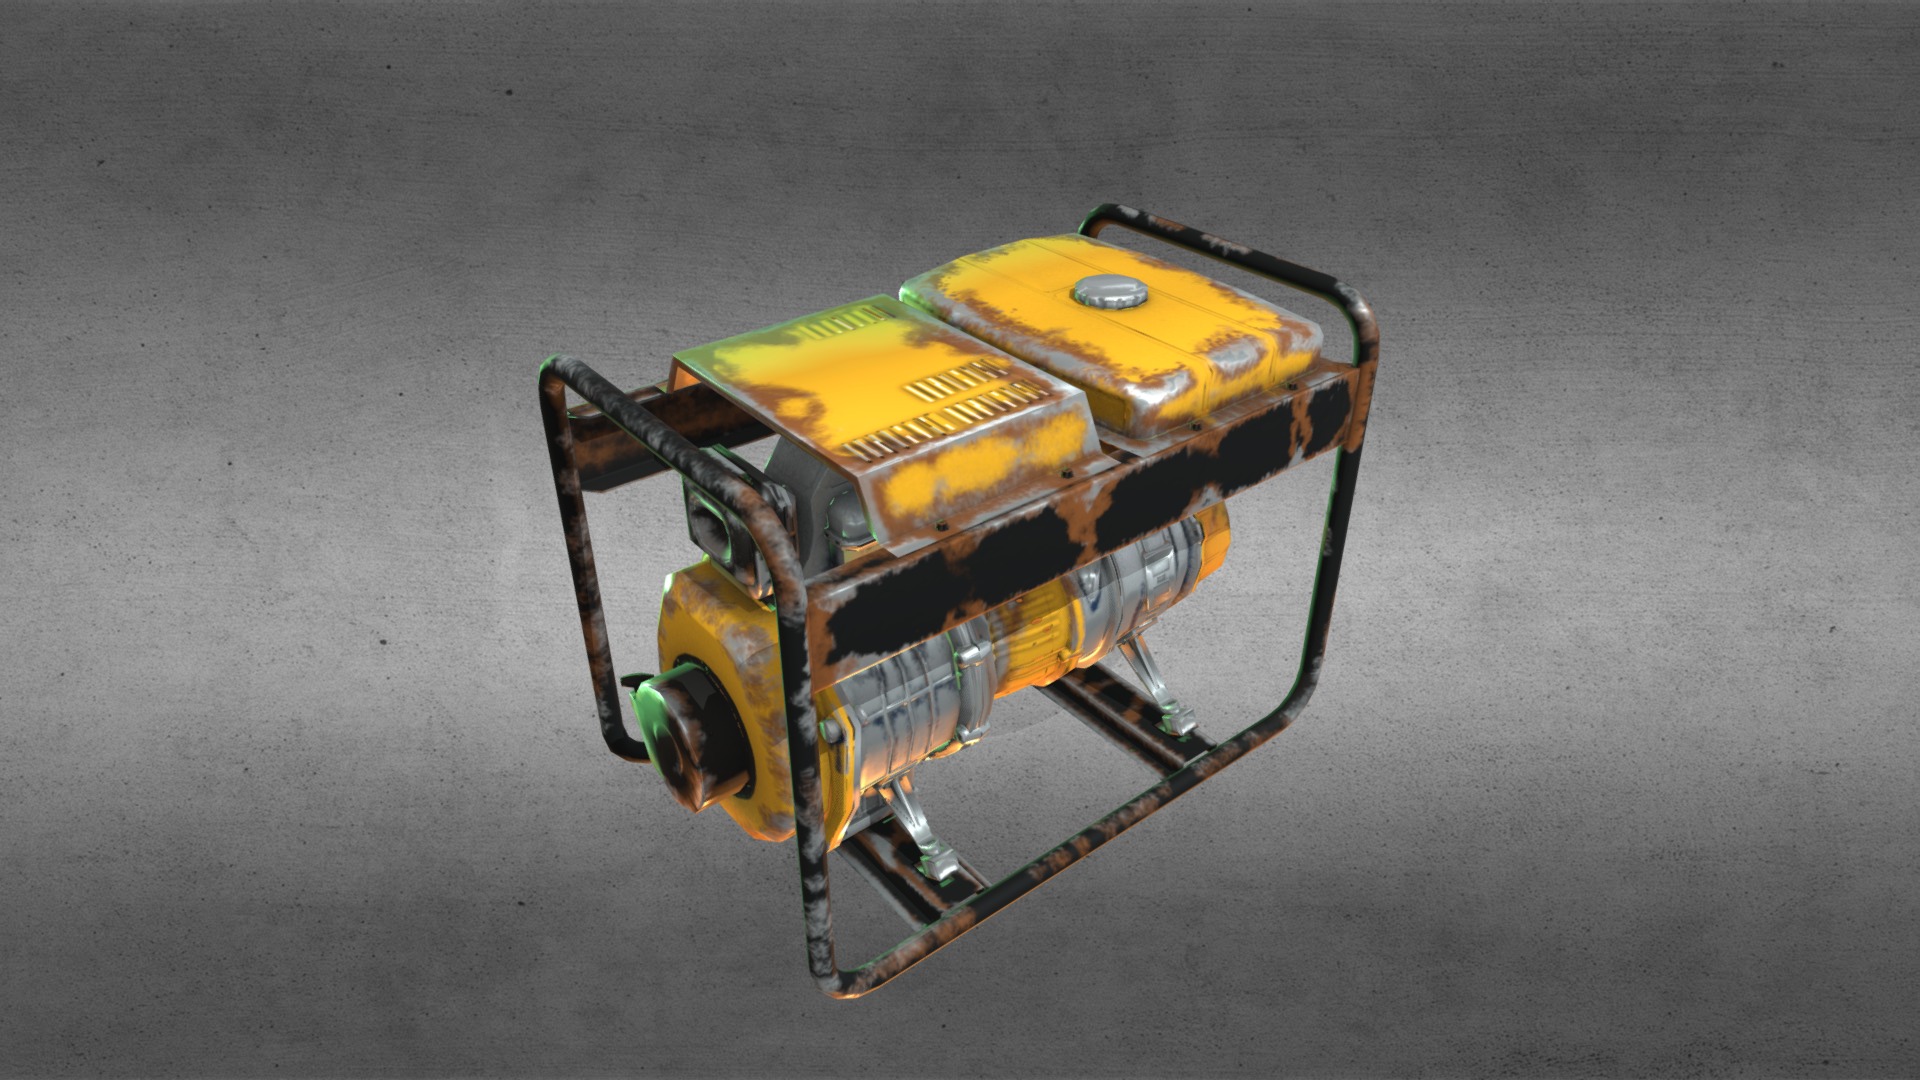 3D model Diesel Generator - This is a 3D model of the Diesel Generator. The 3D model is about a yellow and black toy car.